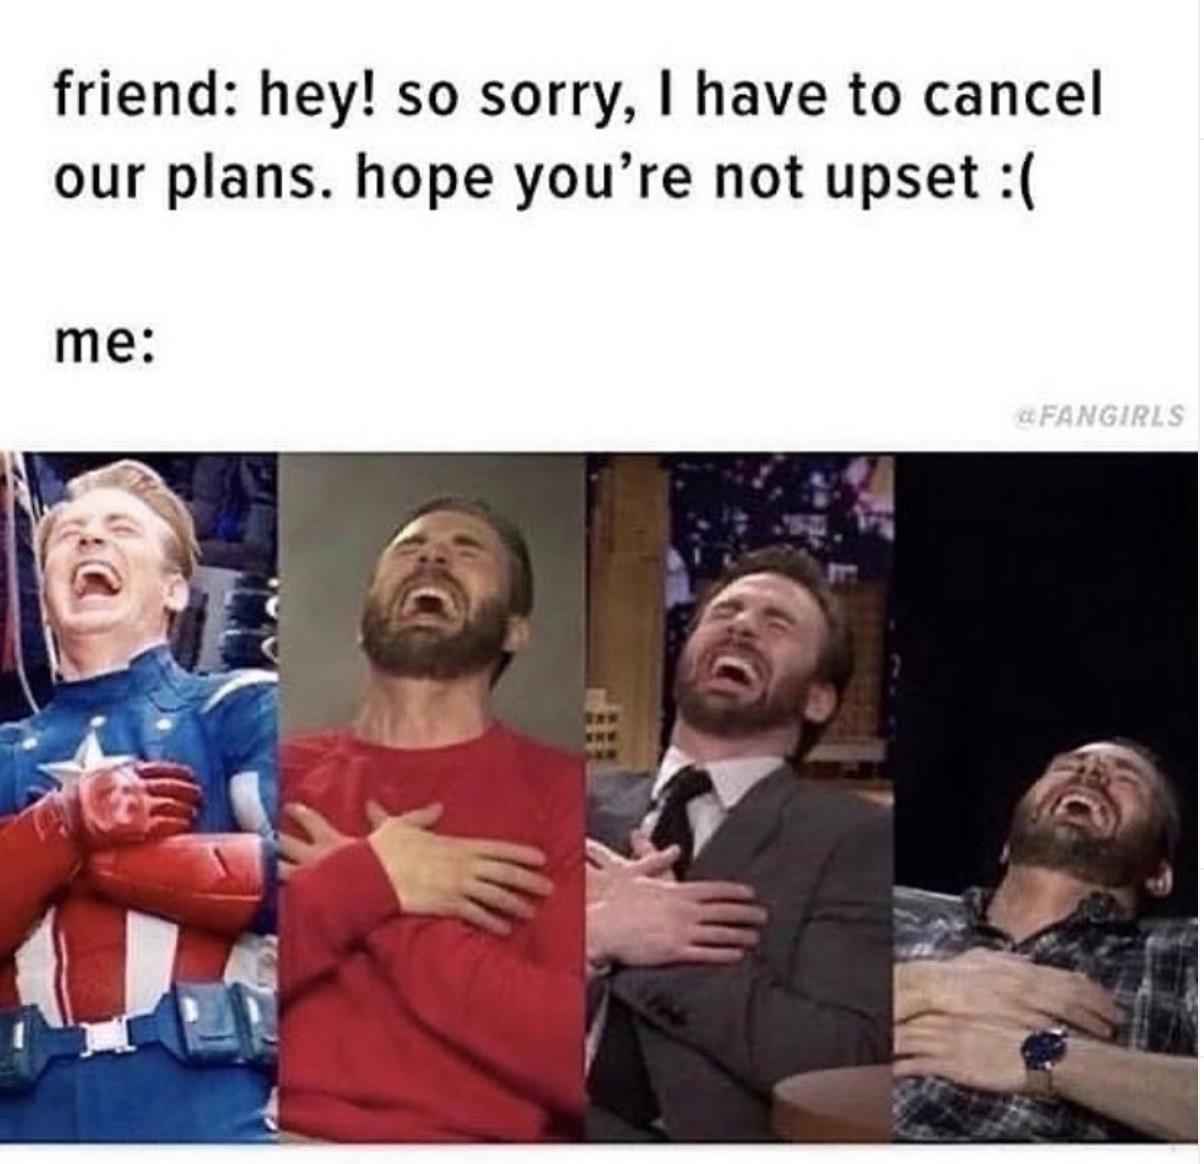 mobile gamers meme - friend hey! so sorry, I have to cancel our plans. hope you're not upset me Fangirls Q